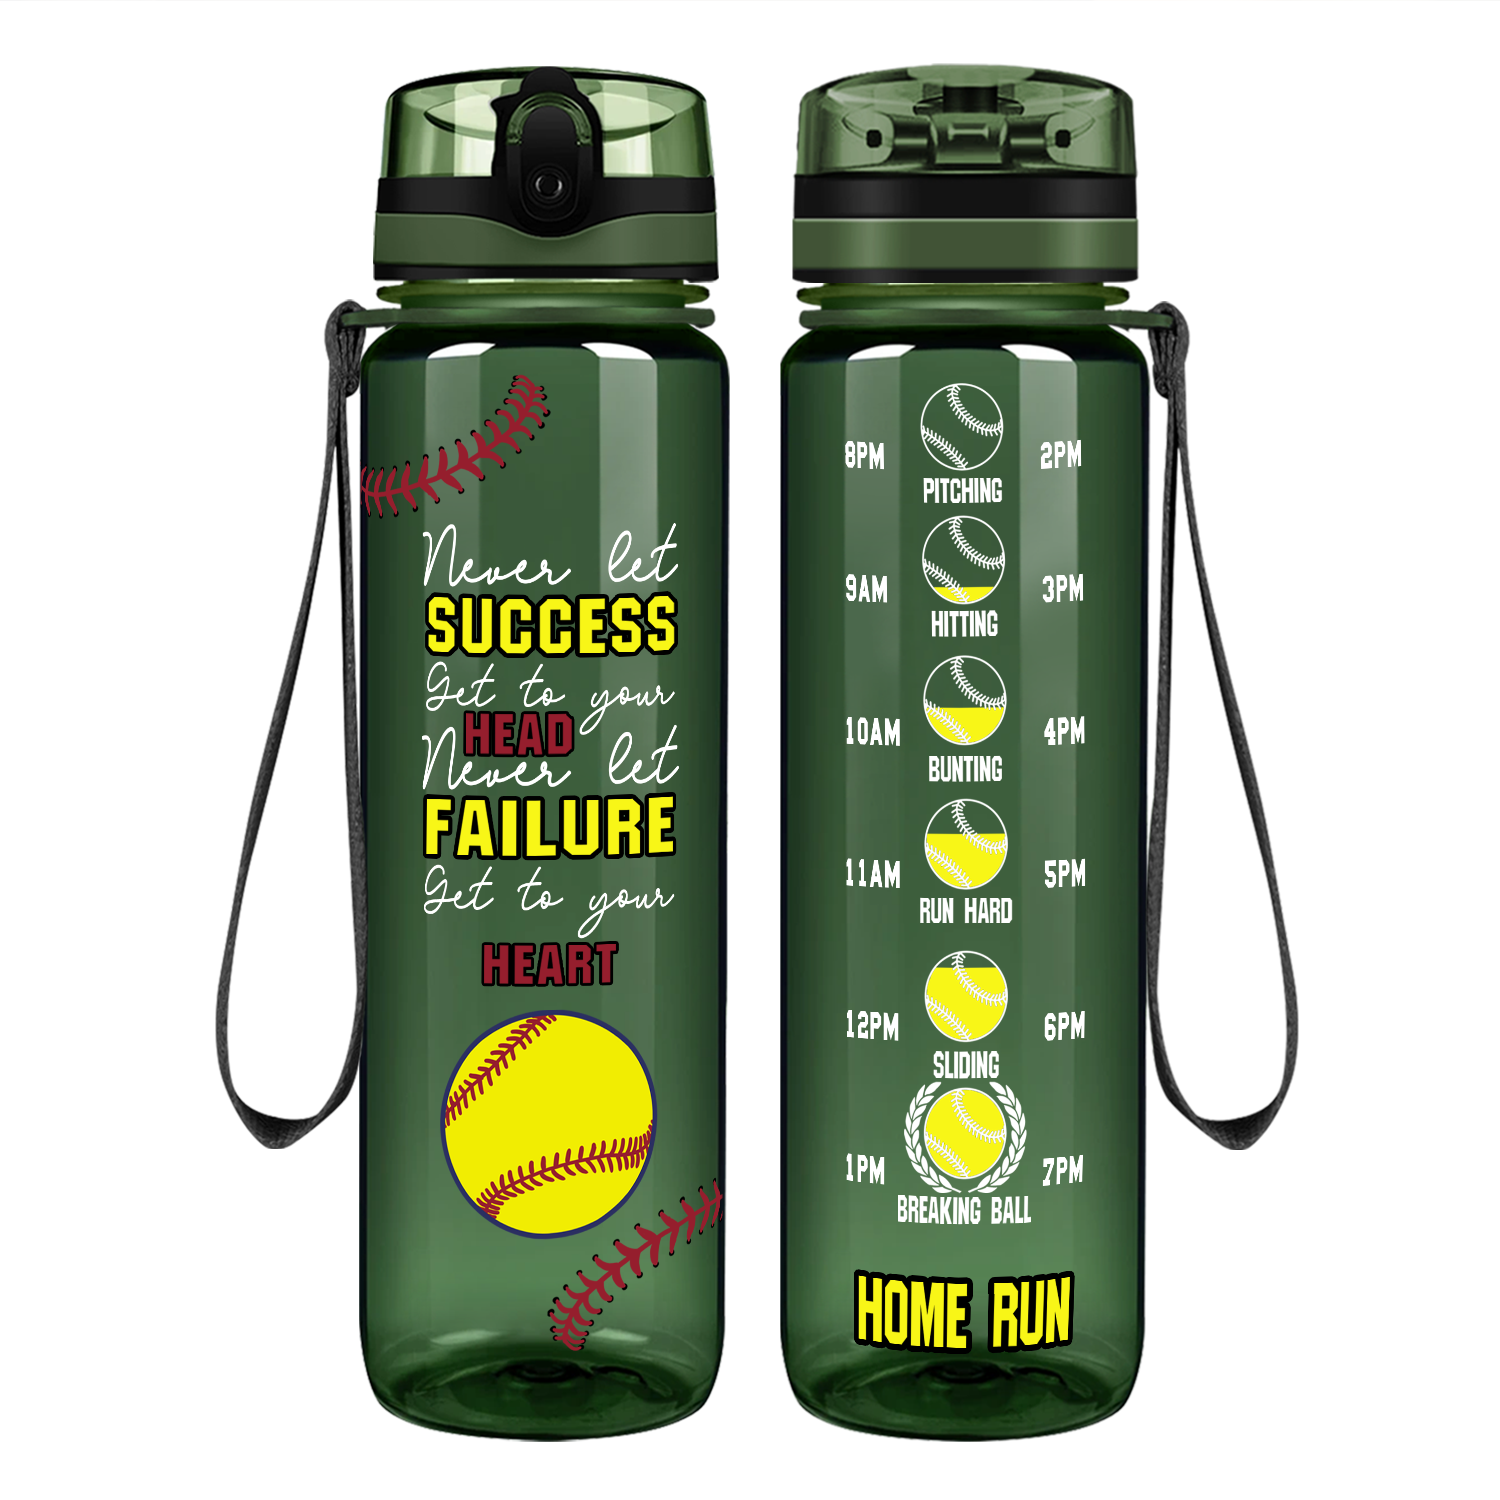 Never Let Success Get to Your Head on 32 oz Motivational Tracking Water Bottle